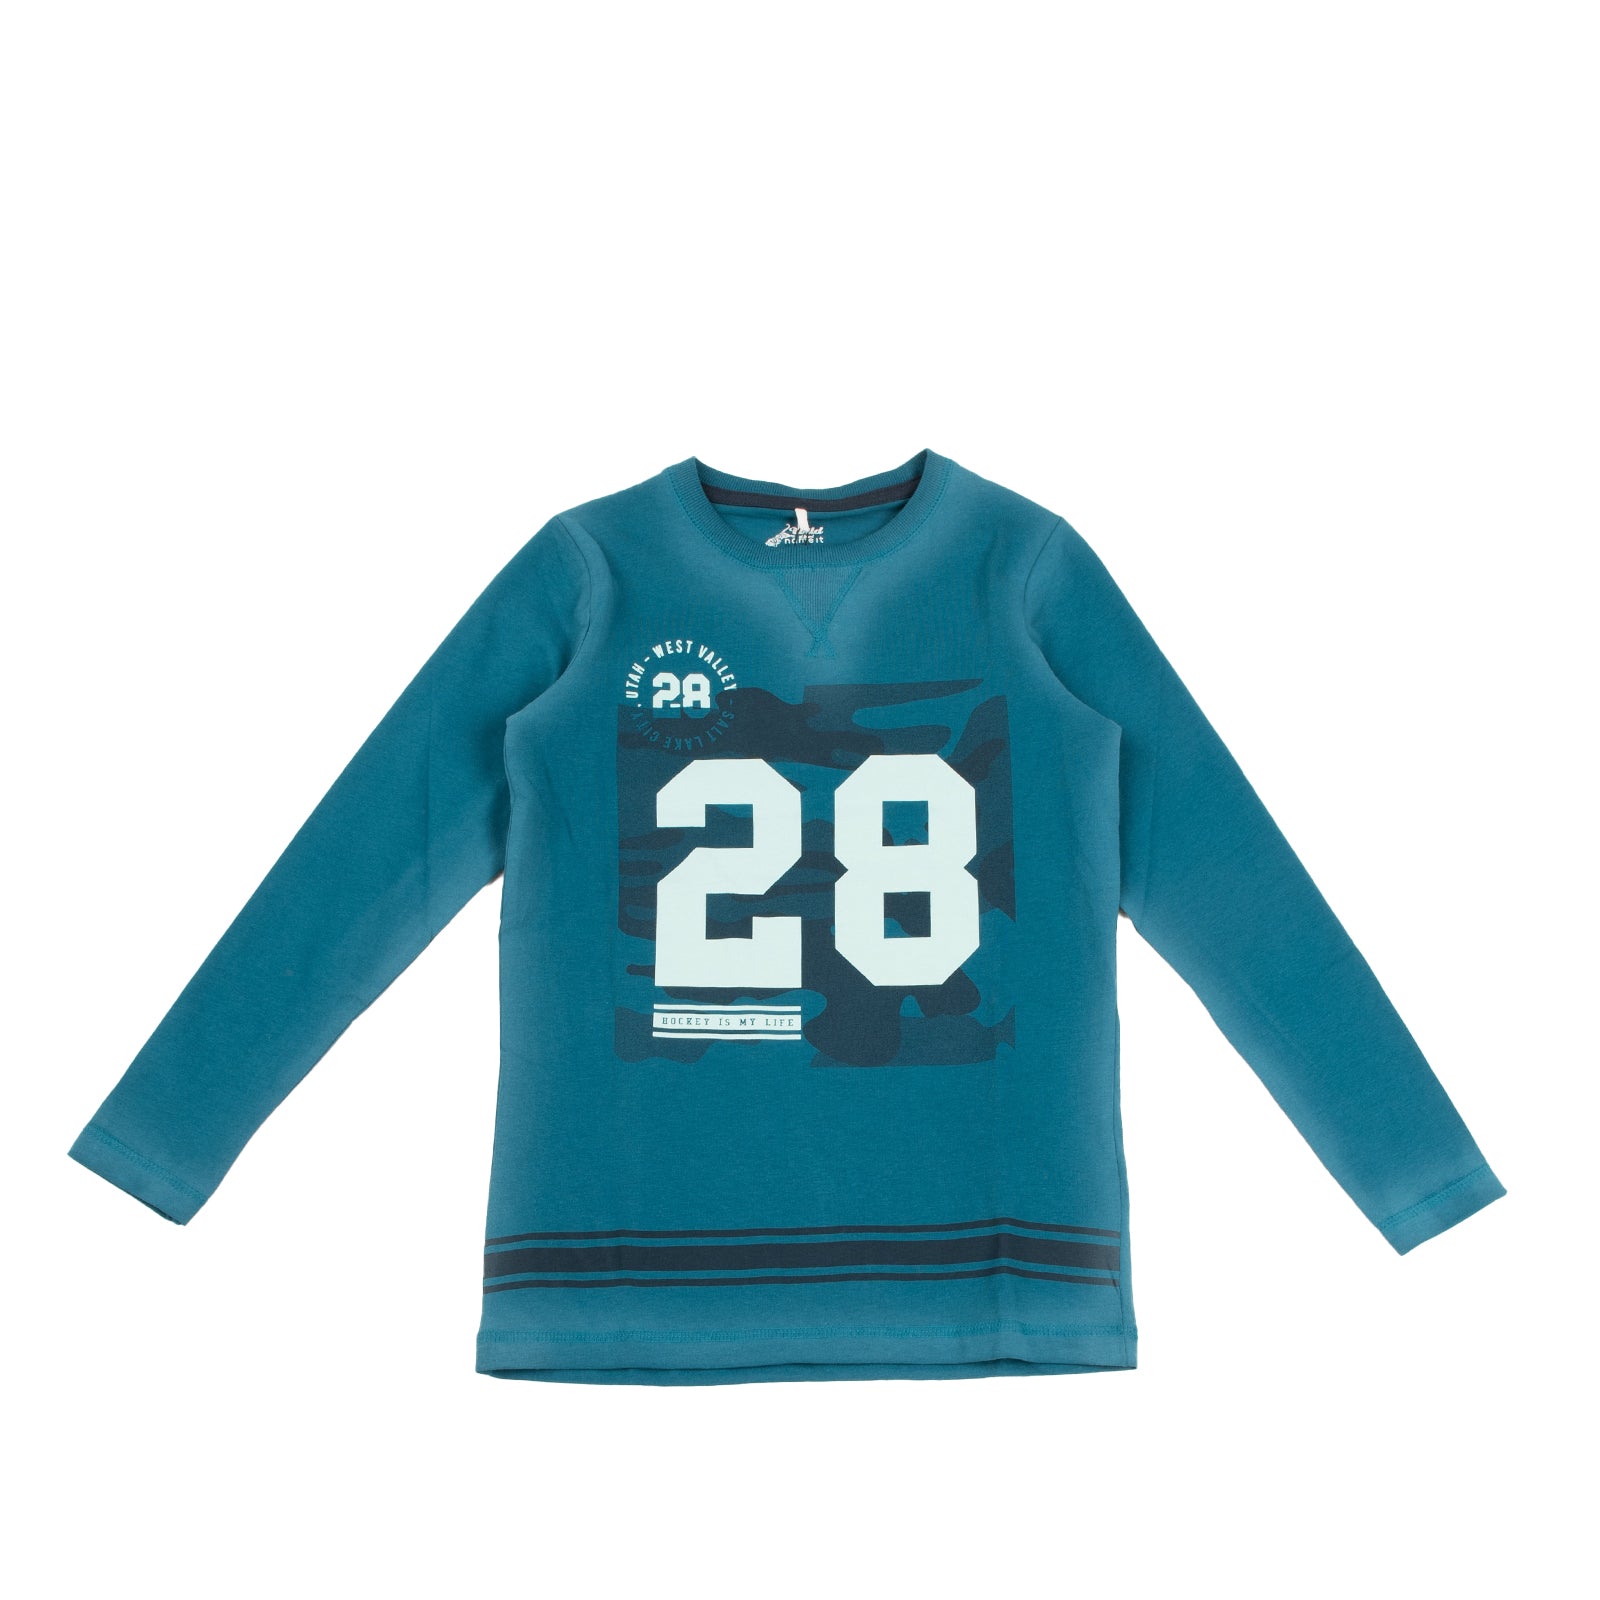 NAME IT T-Shirt Top Size 7-8Y / 122-128CM Coated Front & Back Faded  Effect gallery main photo